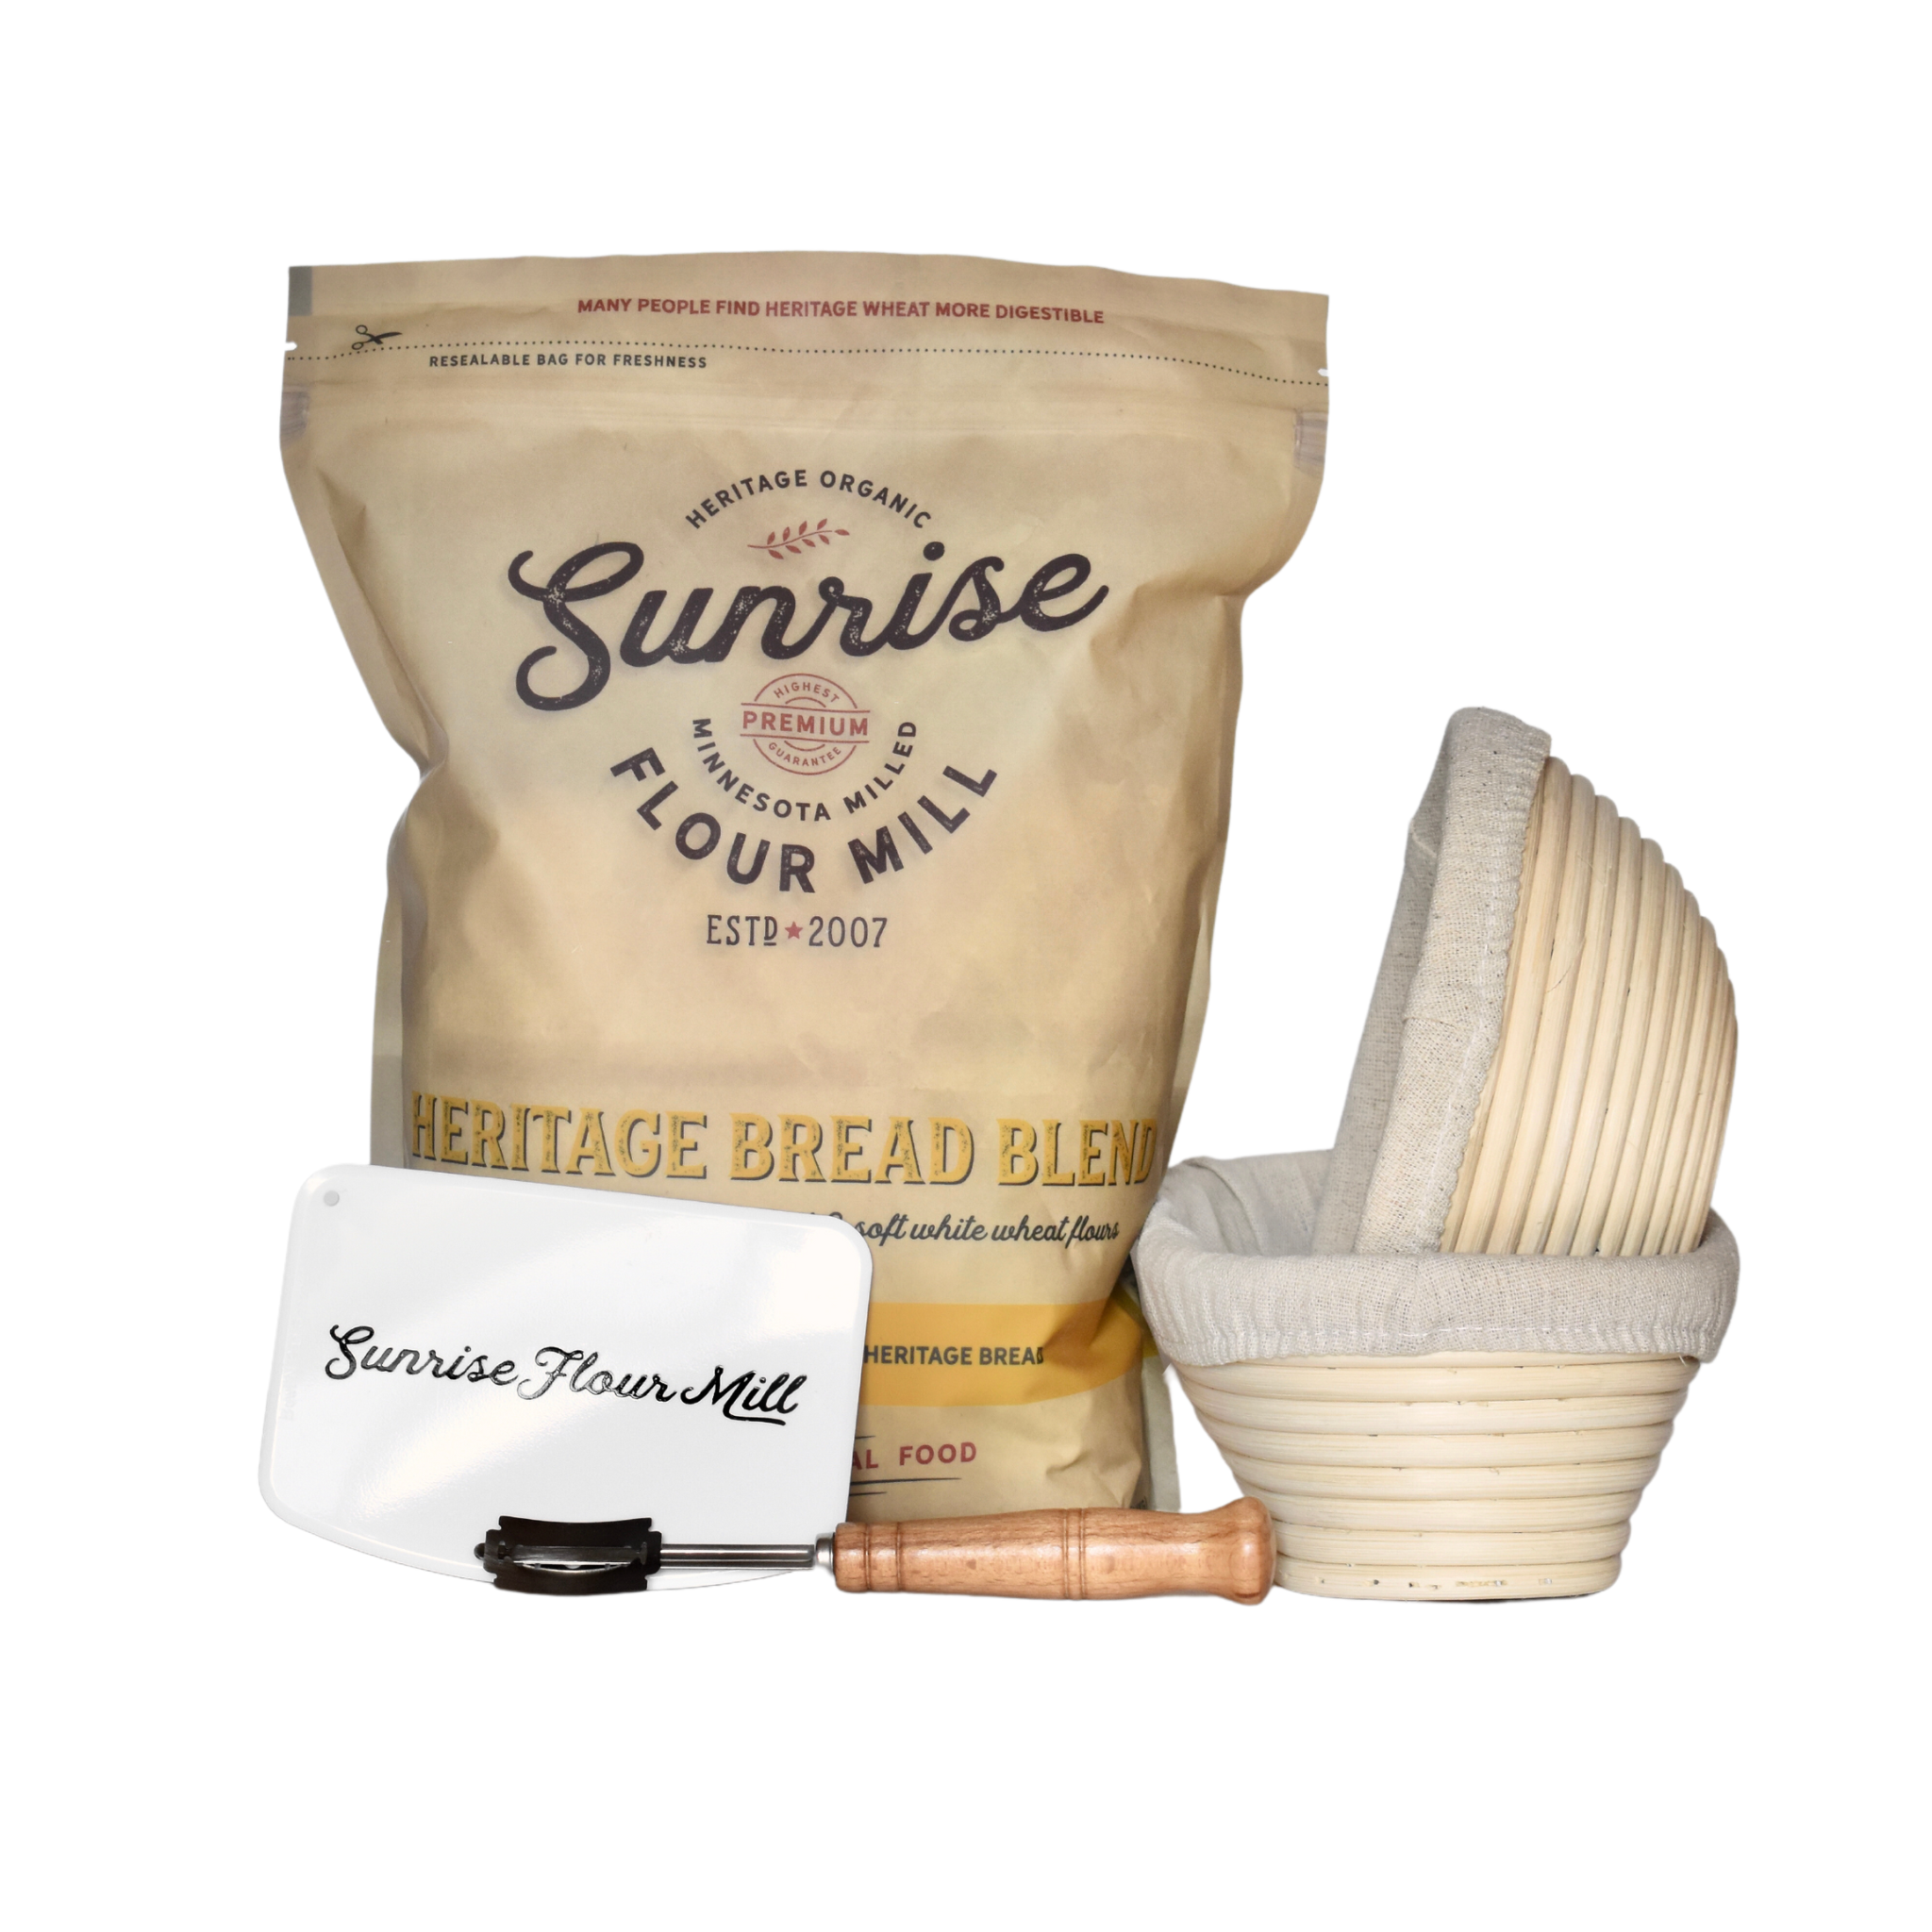 Library of Things: Bread and Scone Kit